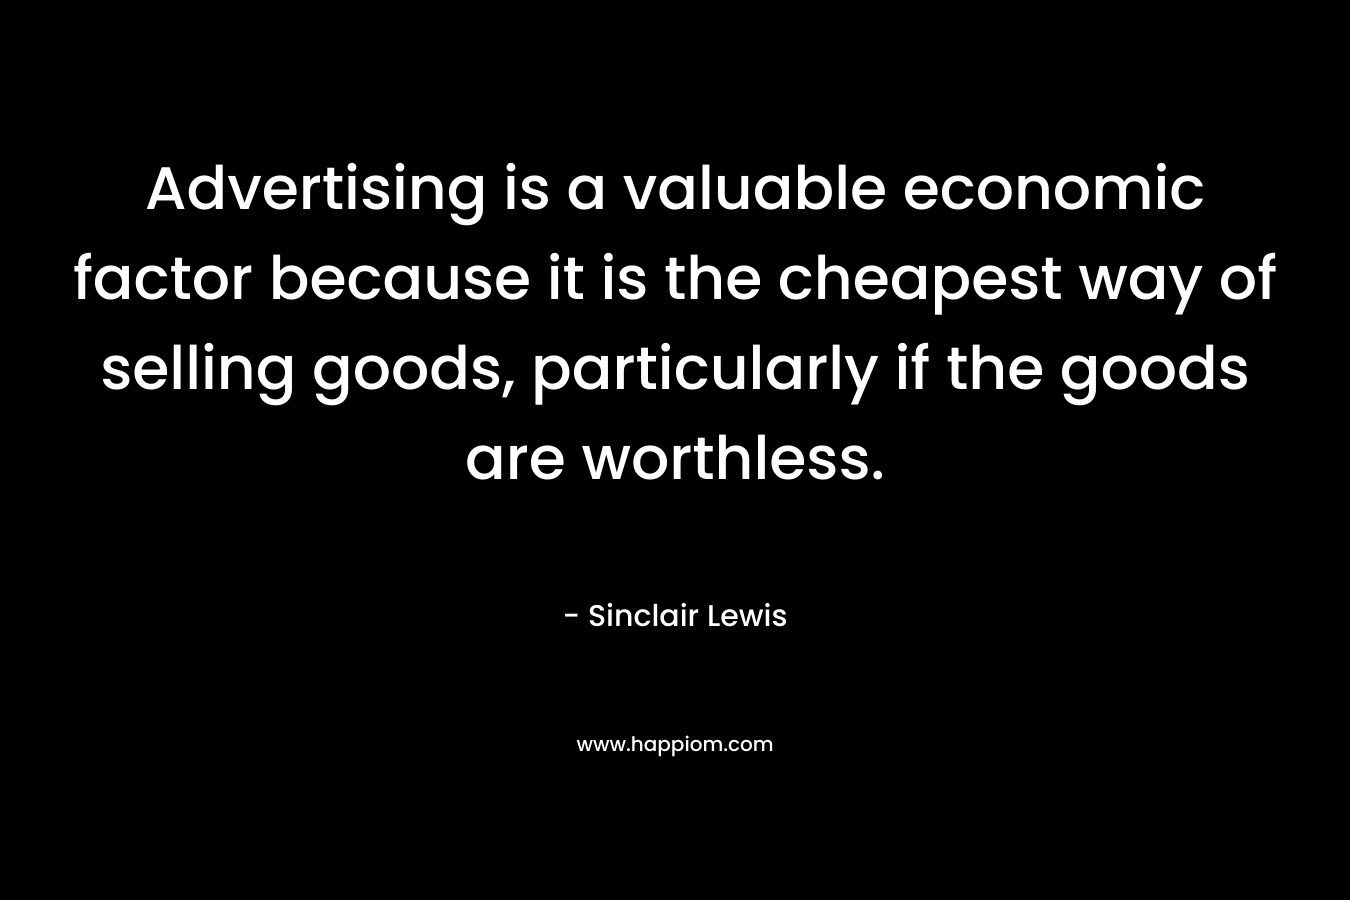 Advertising is a valuable economic factor because it is the cheapest way of selling goods, particularly if the goods are worthless. – Sinclair Lewis